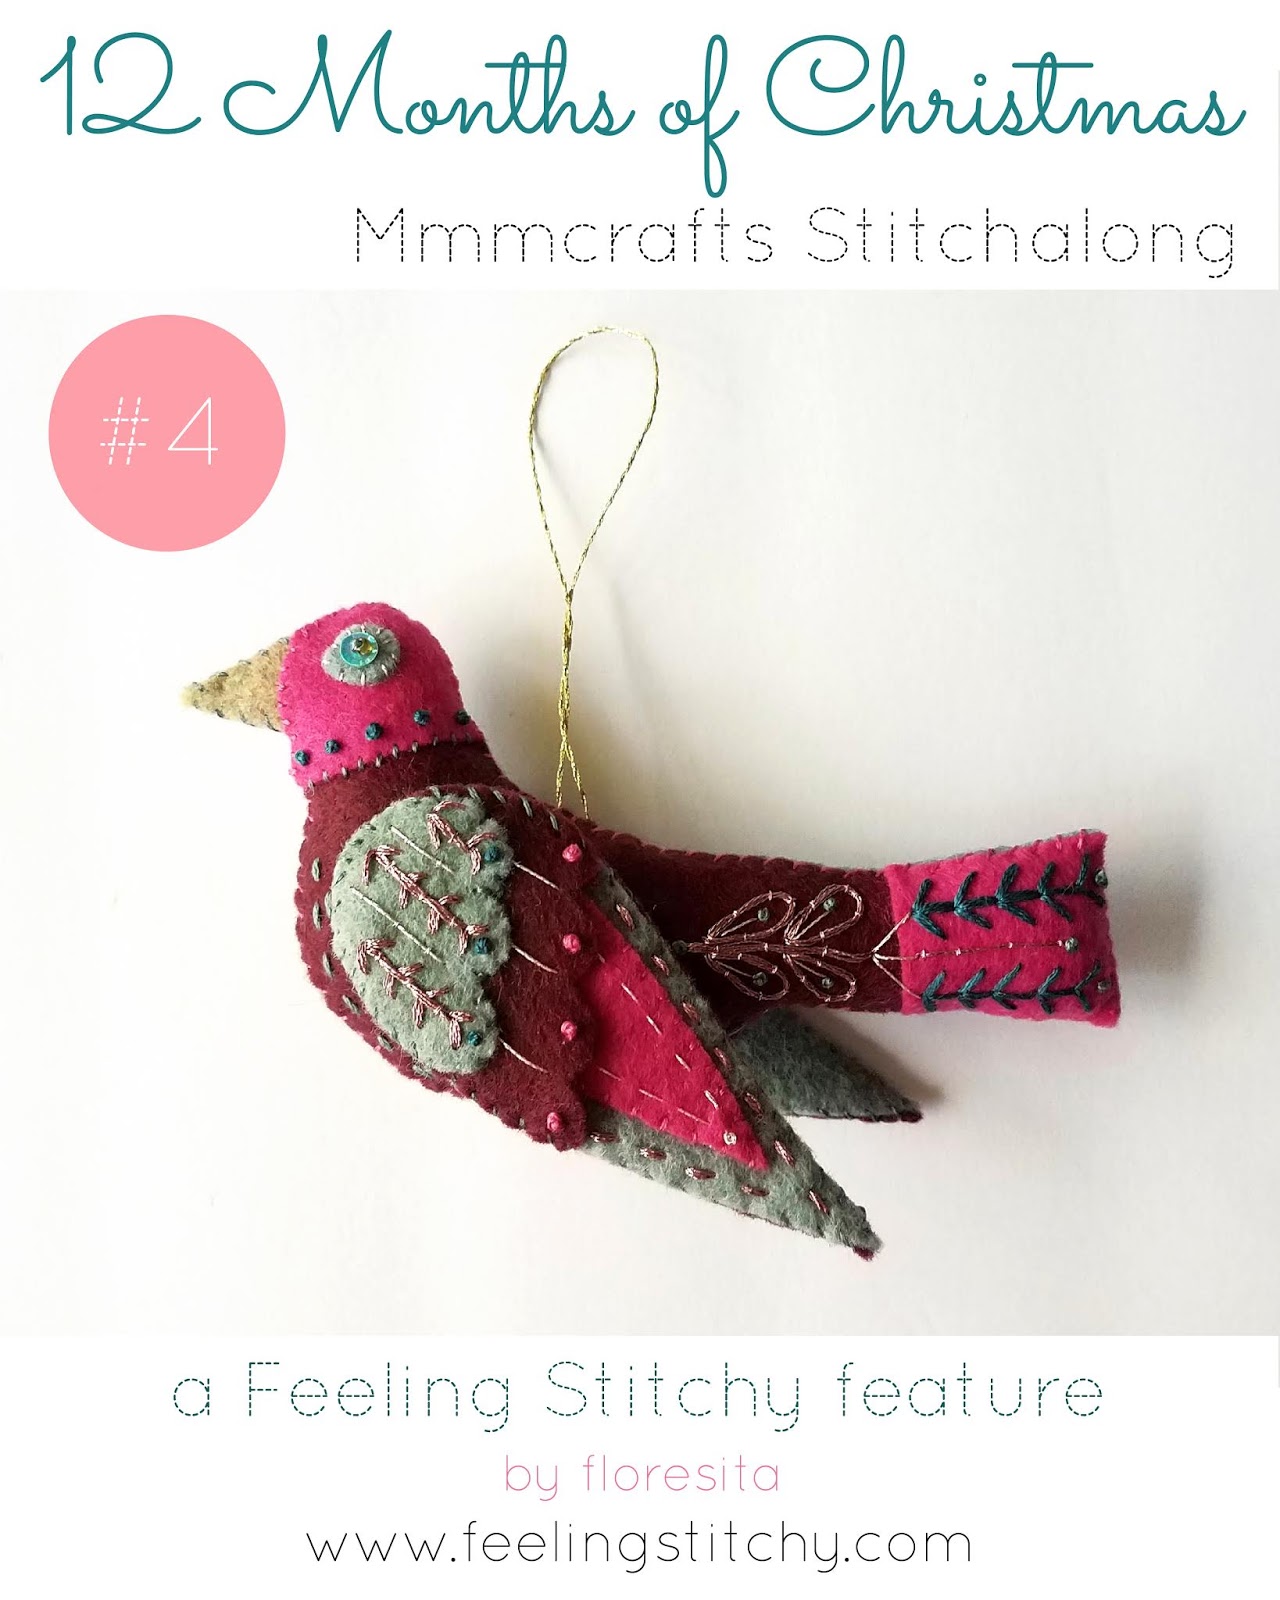 12 Months of Christmas Stitchalong 4 Colly Bird, a feature by floresita on Feeling Stitchy